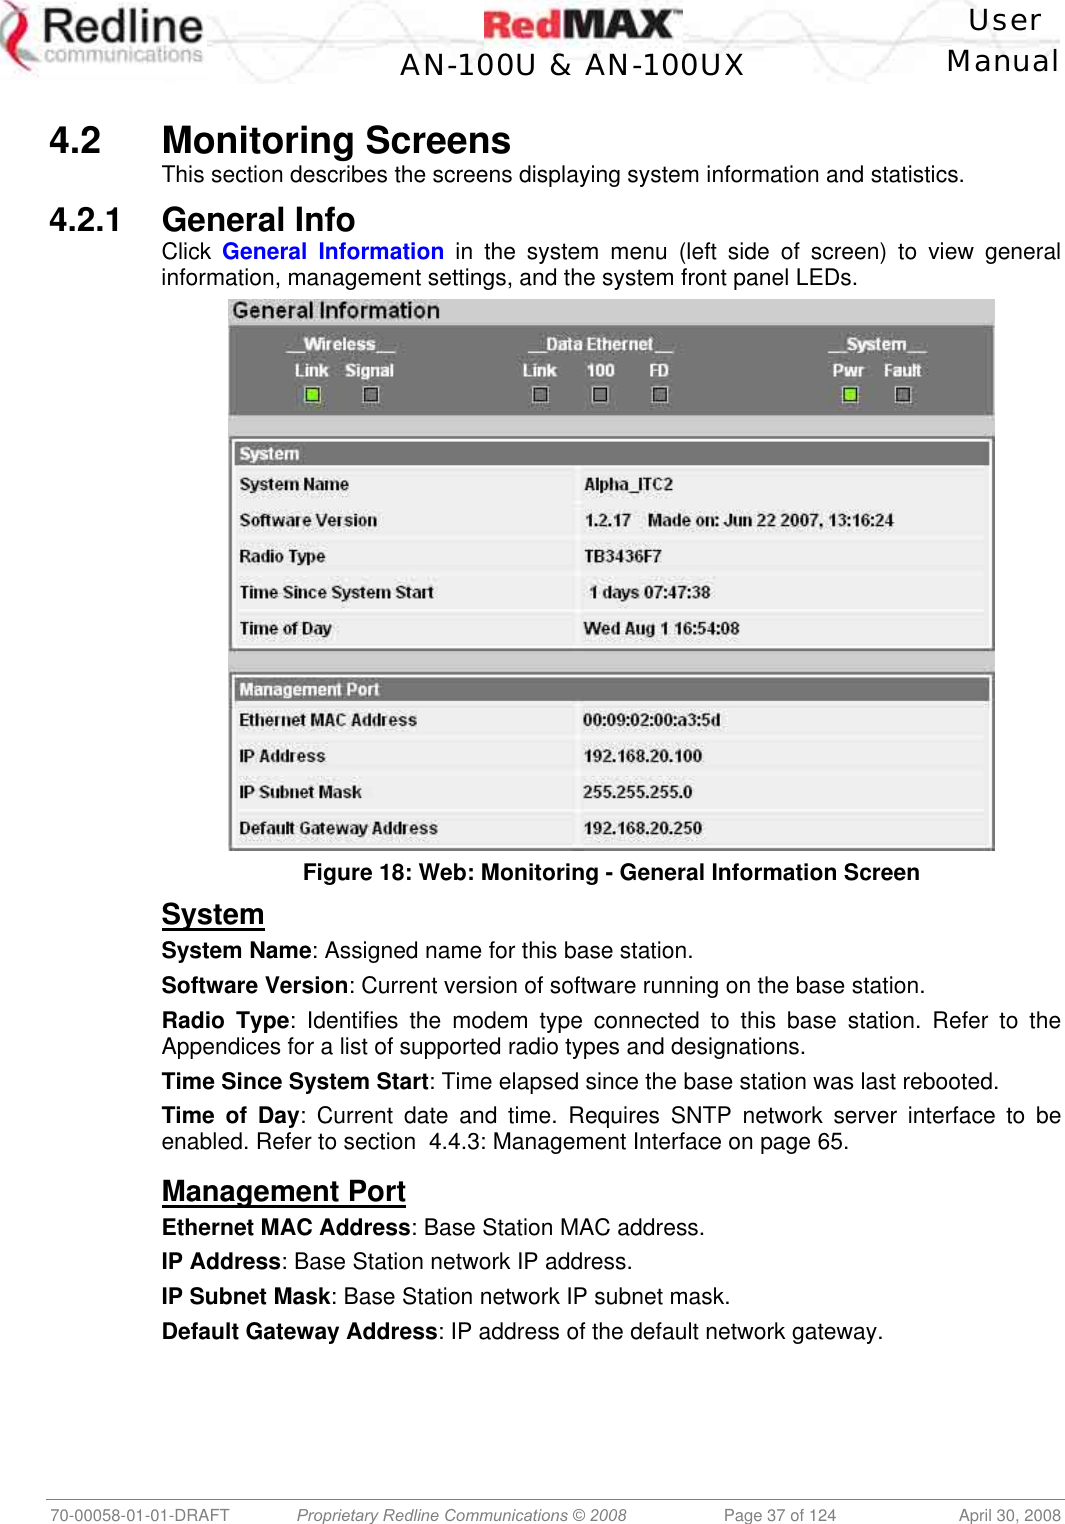    User  AN-100U &amp; AN-100UX Manual   70-00058-01-01-DRAFT  Proprietary Redline Communications © 2008   Page 37 of 124  April 30, 2008  4.2 Monitoring Screens This section describes the screens displaying system information and statistics. 4.2.1 General Info Click  General Information in the system menu (left side of screen) to view general information, management settings, and the system front panel LEDs.  Figure 18: Web: Monitoring - General Information Screen System System Name: Assigned name for this base station. Software Version: Current version of software running on the base station.  Radio Type: Identifies the modem type connected to this base station. Refer to the Appendices for a list of supported radio types and designations. Time Since System Start: Time elapsed since the base station was last rebooted. Time of Day: Current date and time. Requires SNTP network server interface to be enabled. Refer to section  4.4.3: Management Interface on page 65.  Management Port Ethernet MAC Address: Base Station MAC address. IP Address: Base Station network IP address. IP Subnet Mask: Base Station network IP subnet mask. Default Gateway Address: IP address of the default network gateway. 